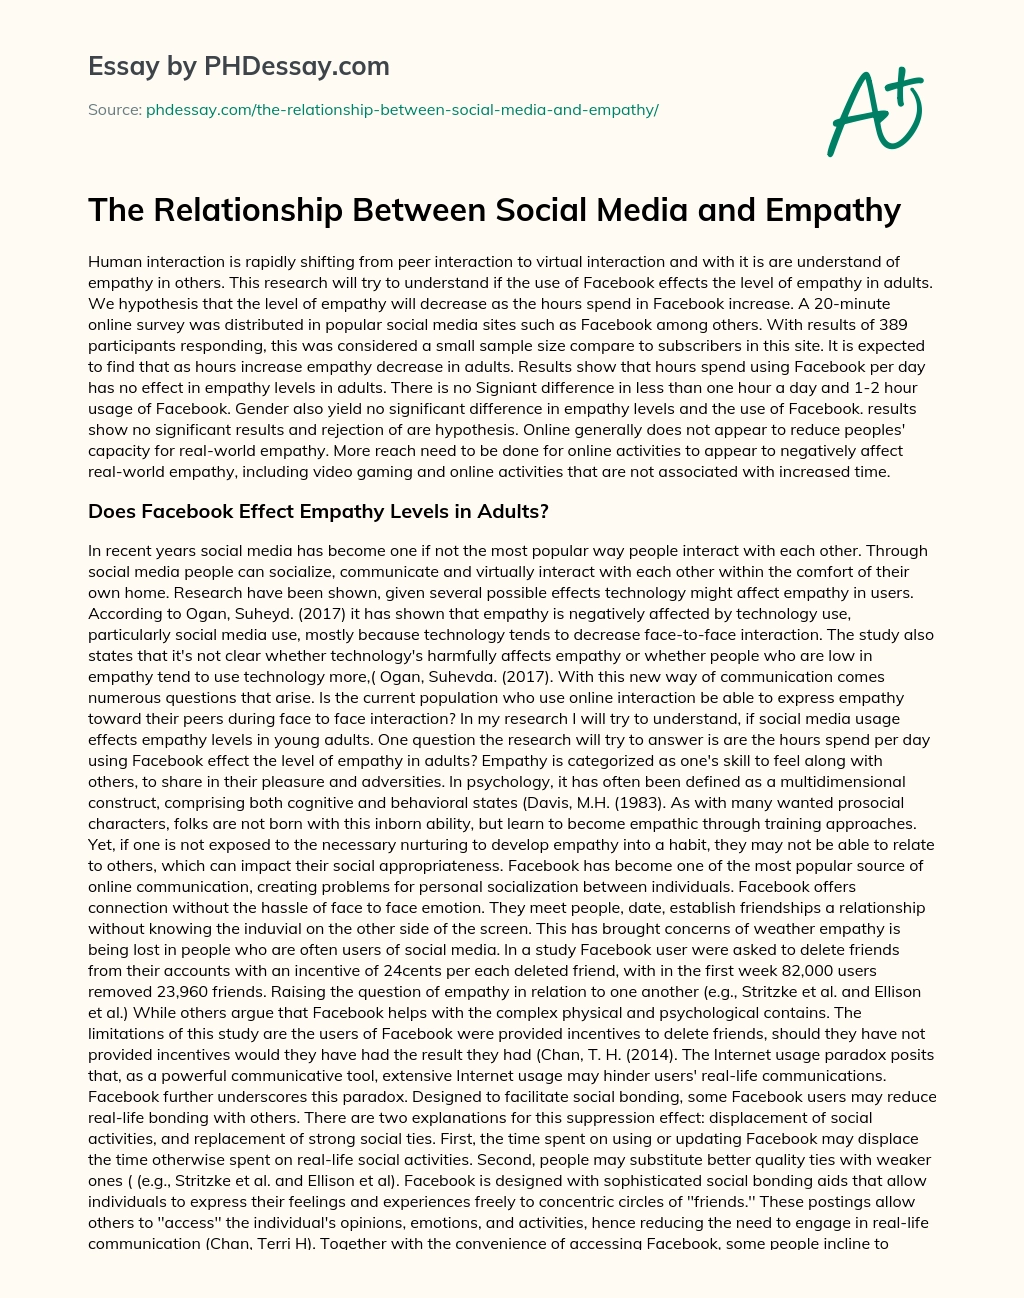 The Relationship Between Social Media and Empathy essay